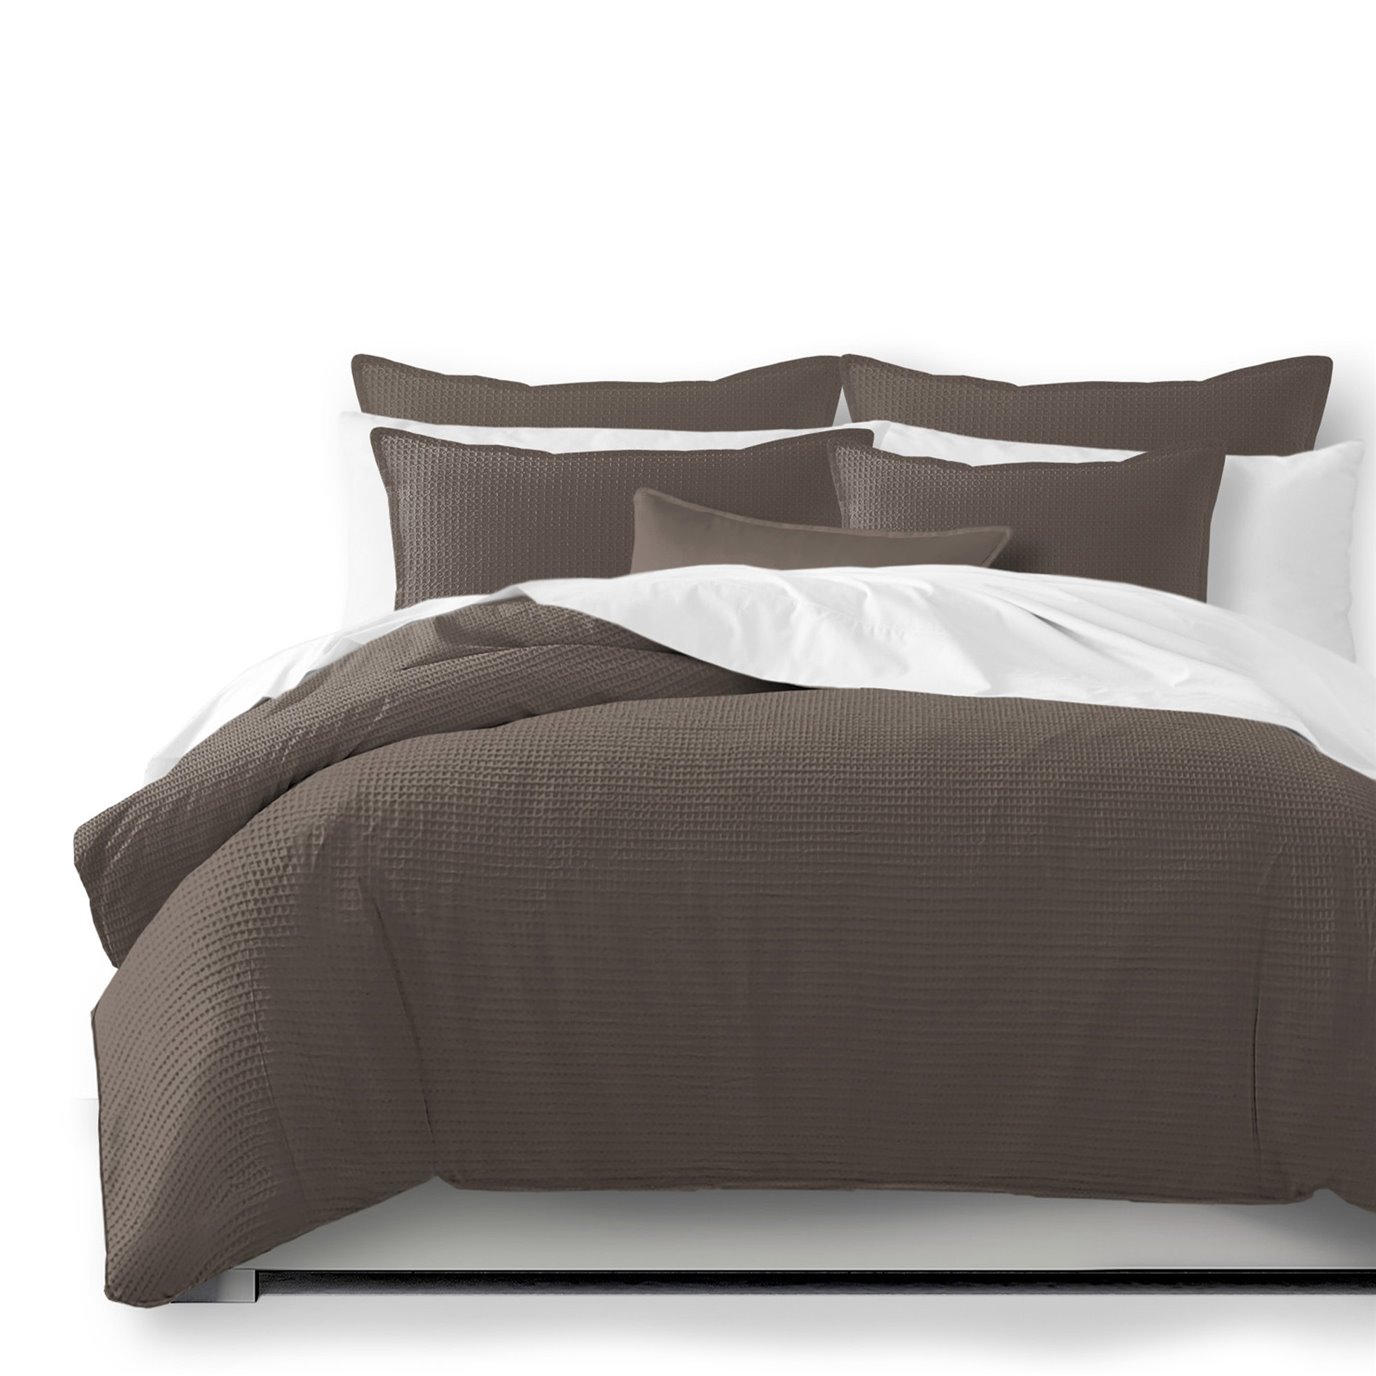 Classic Waffle Mocca Coverlet and Pillow Sham(s) Set - Size Queen